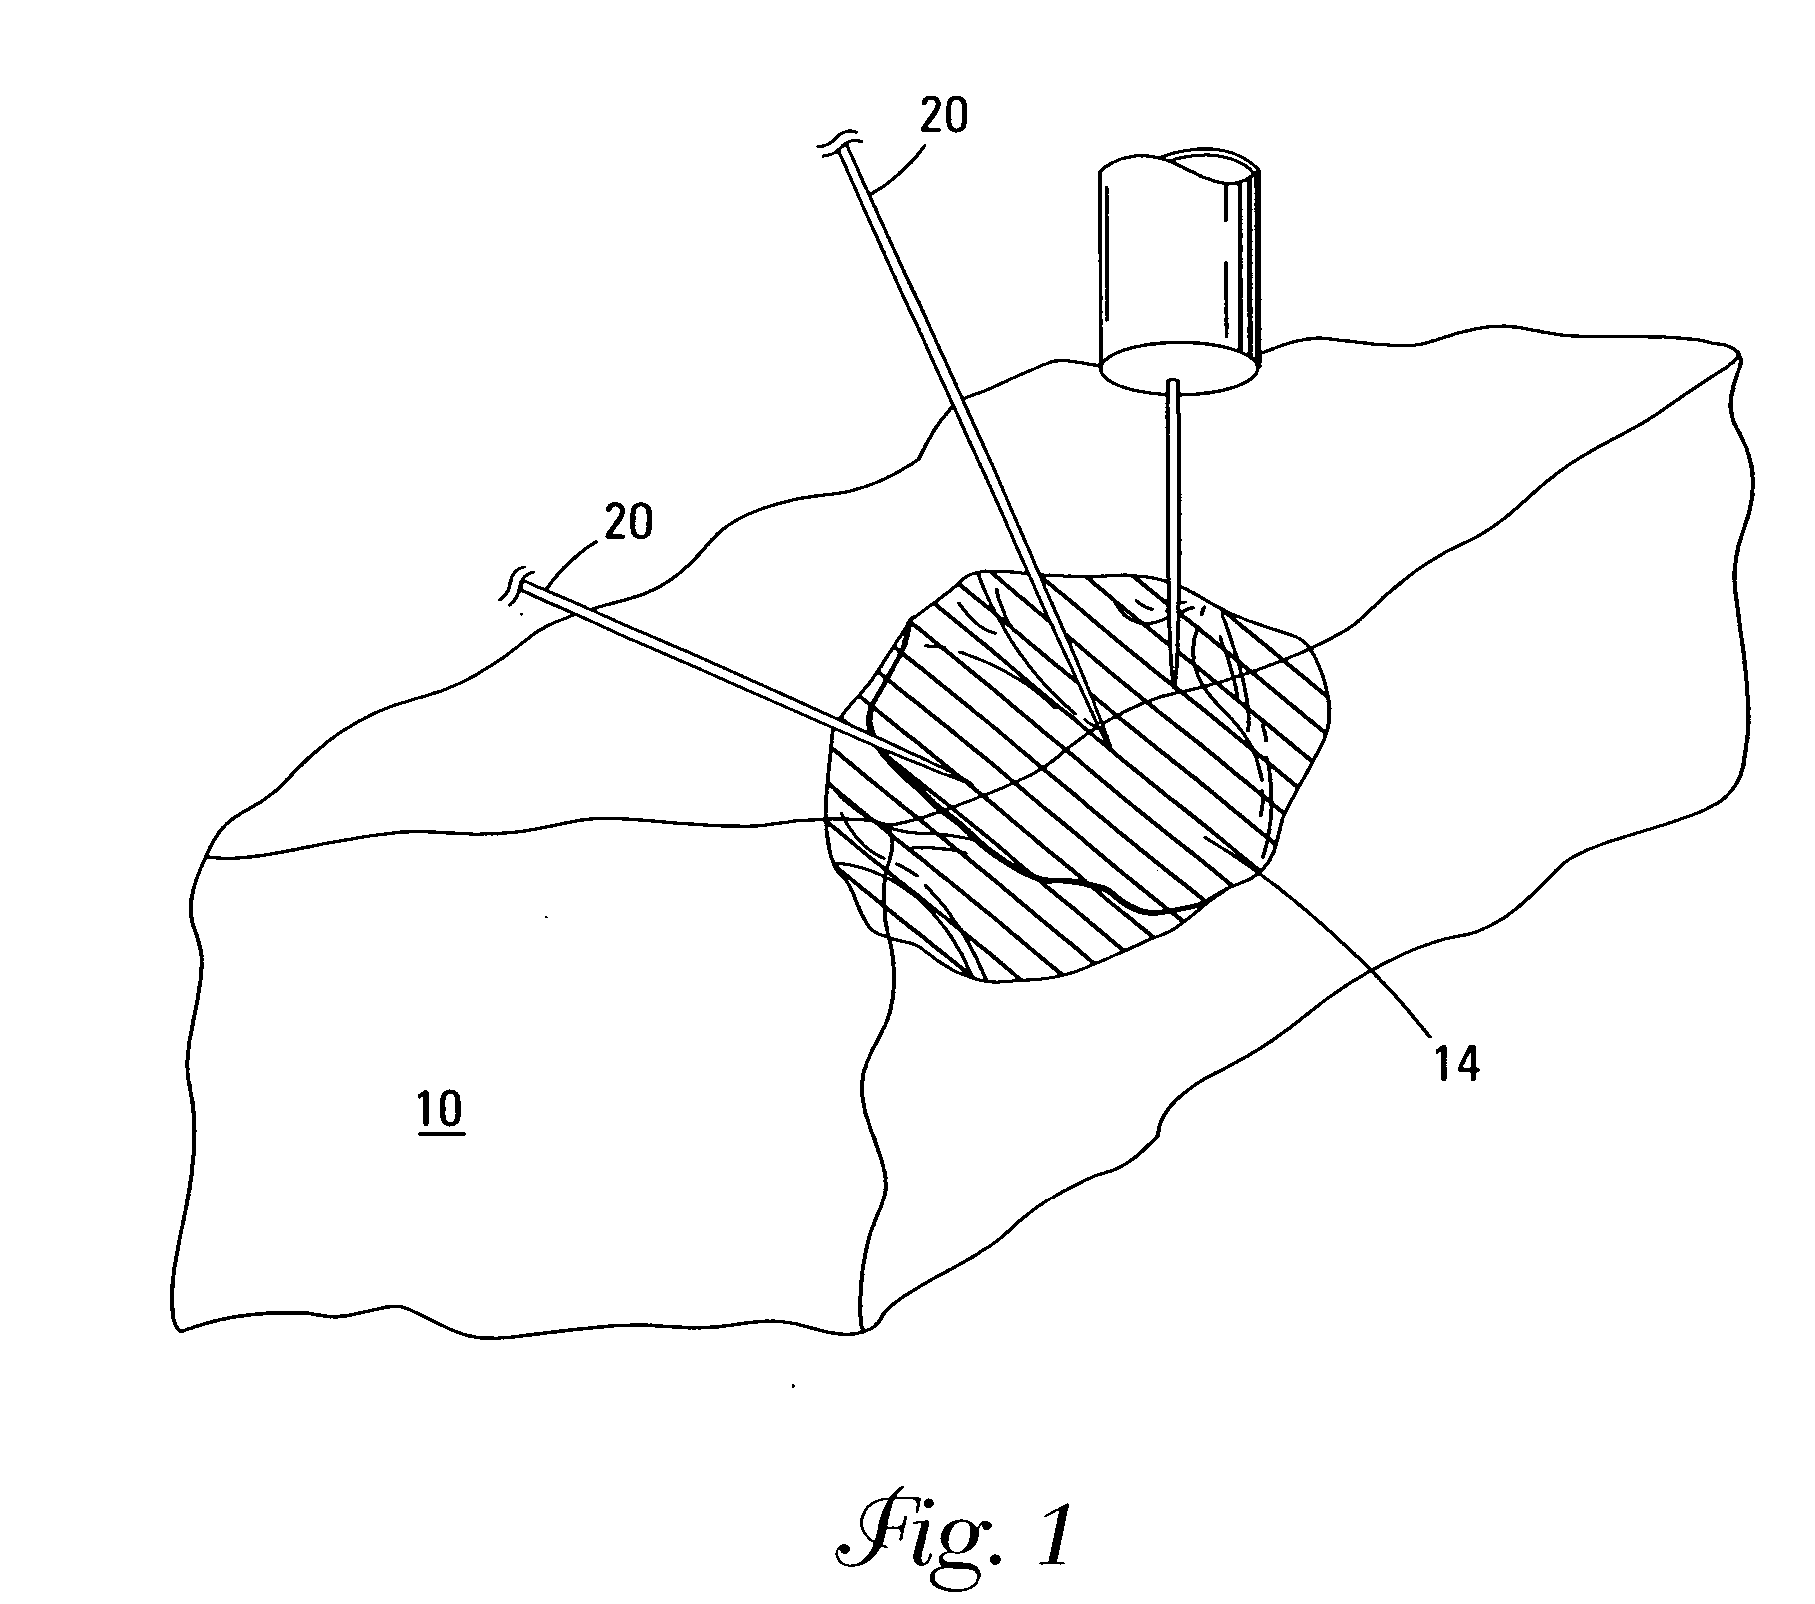 Cryosurgery compositions and methods